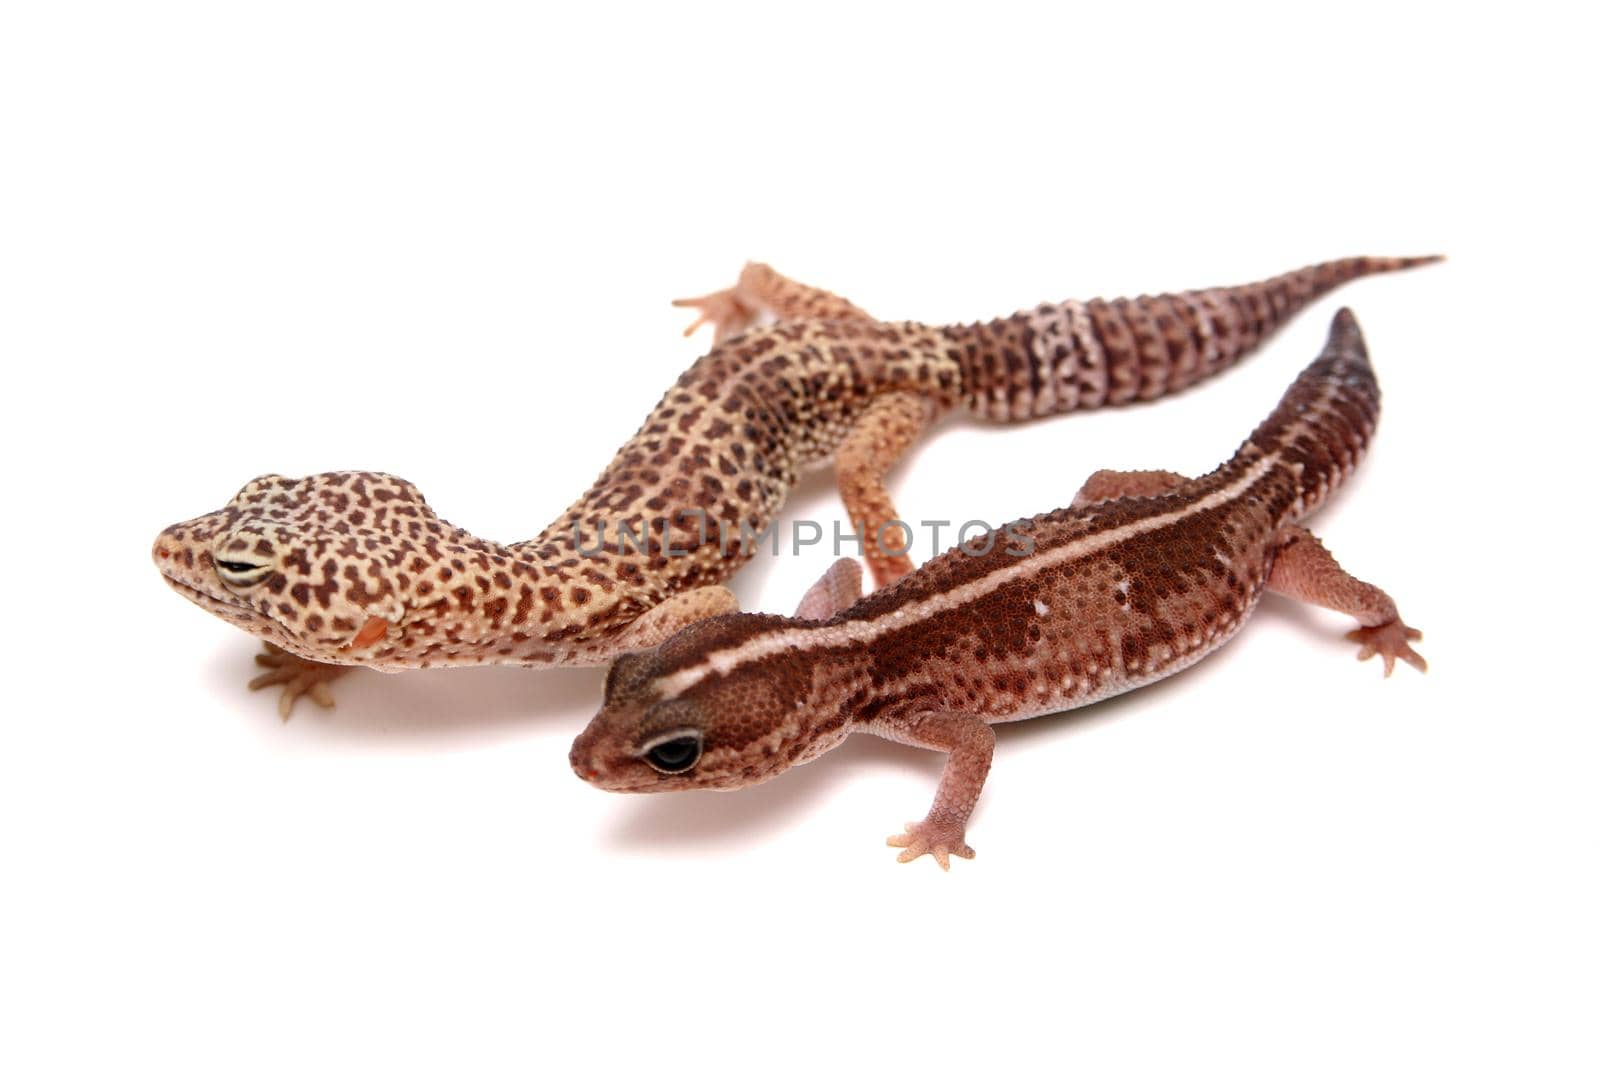 Leopard gecko on white by RosaJay